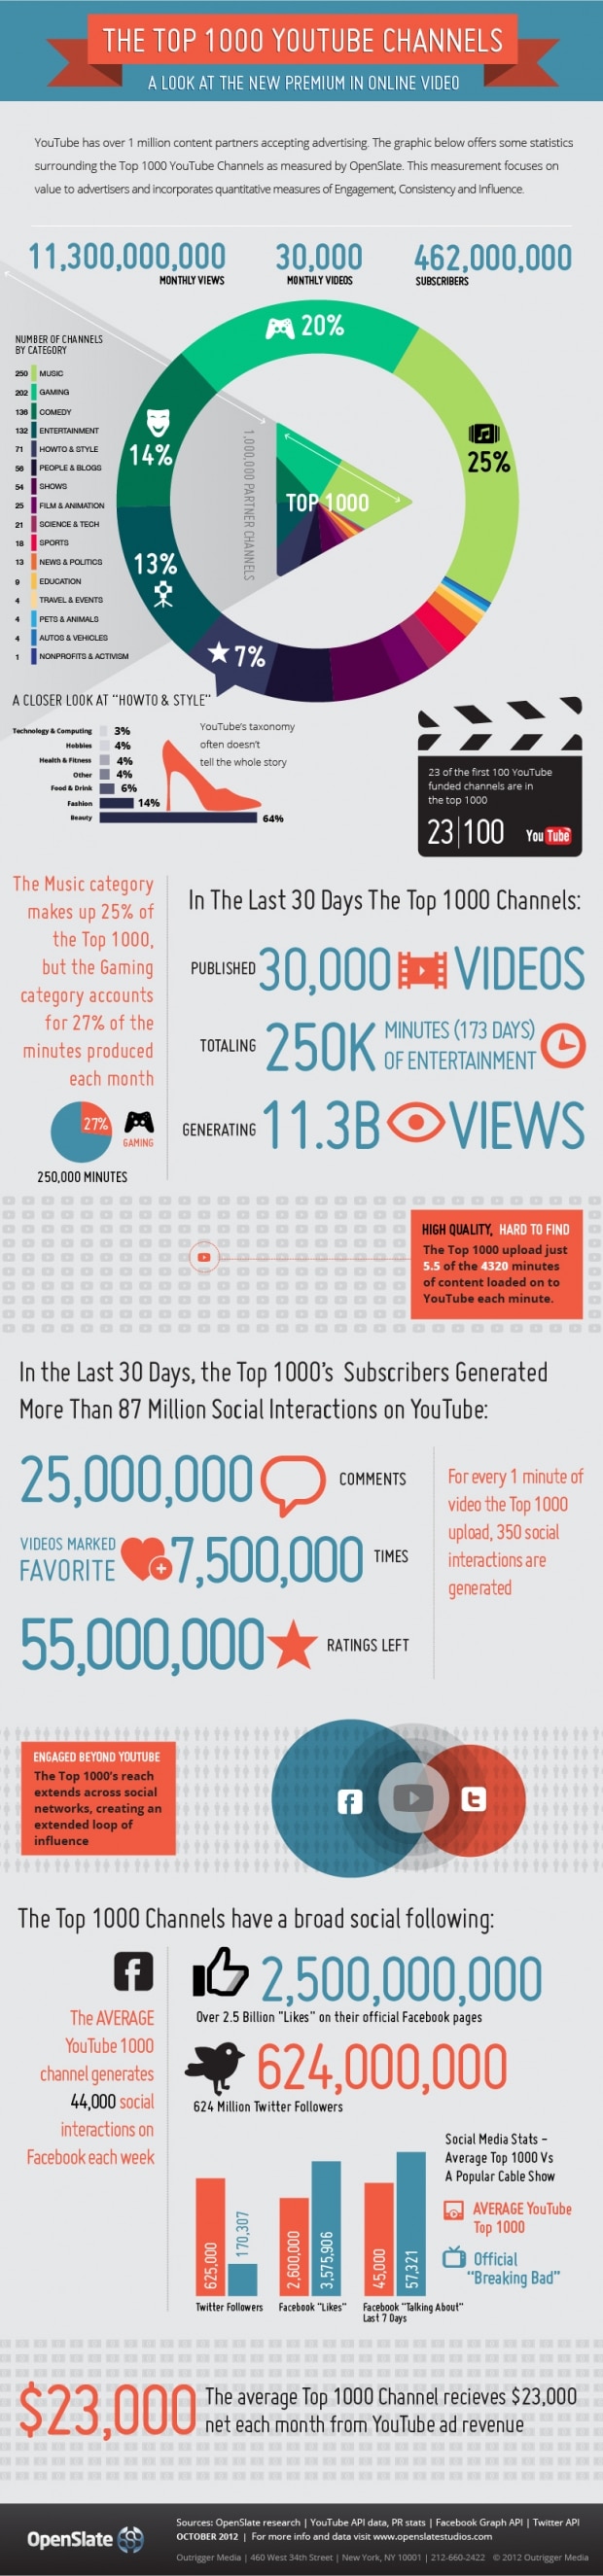 YouTube Earnings For The Top 1,000 Partners [Infographic]